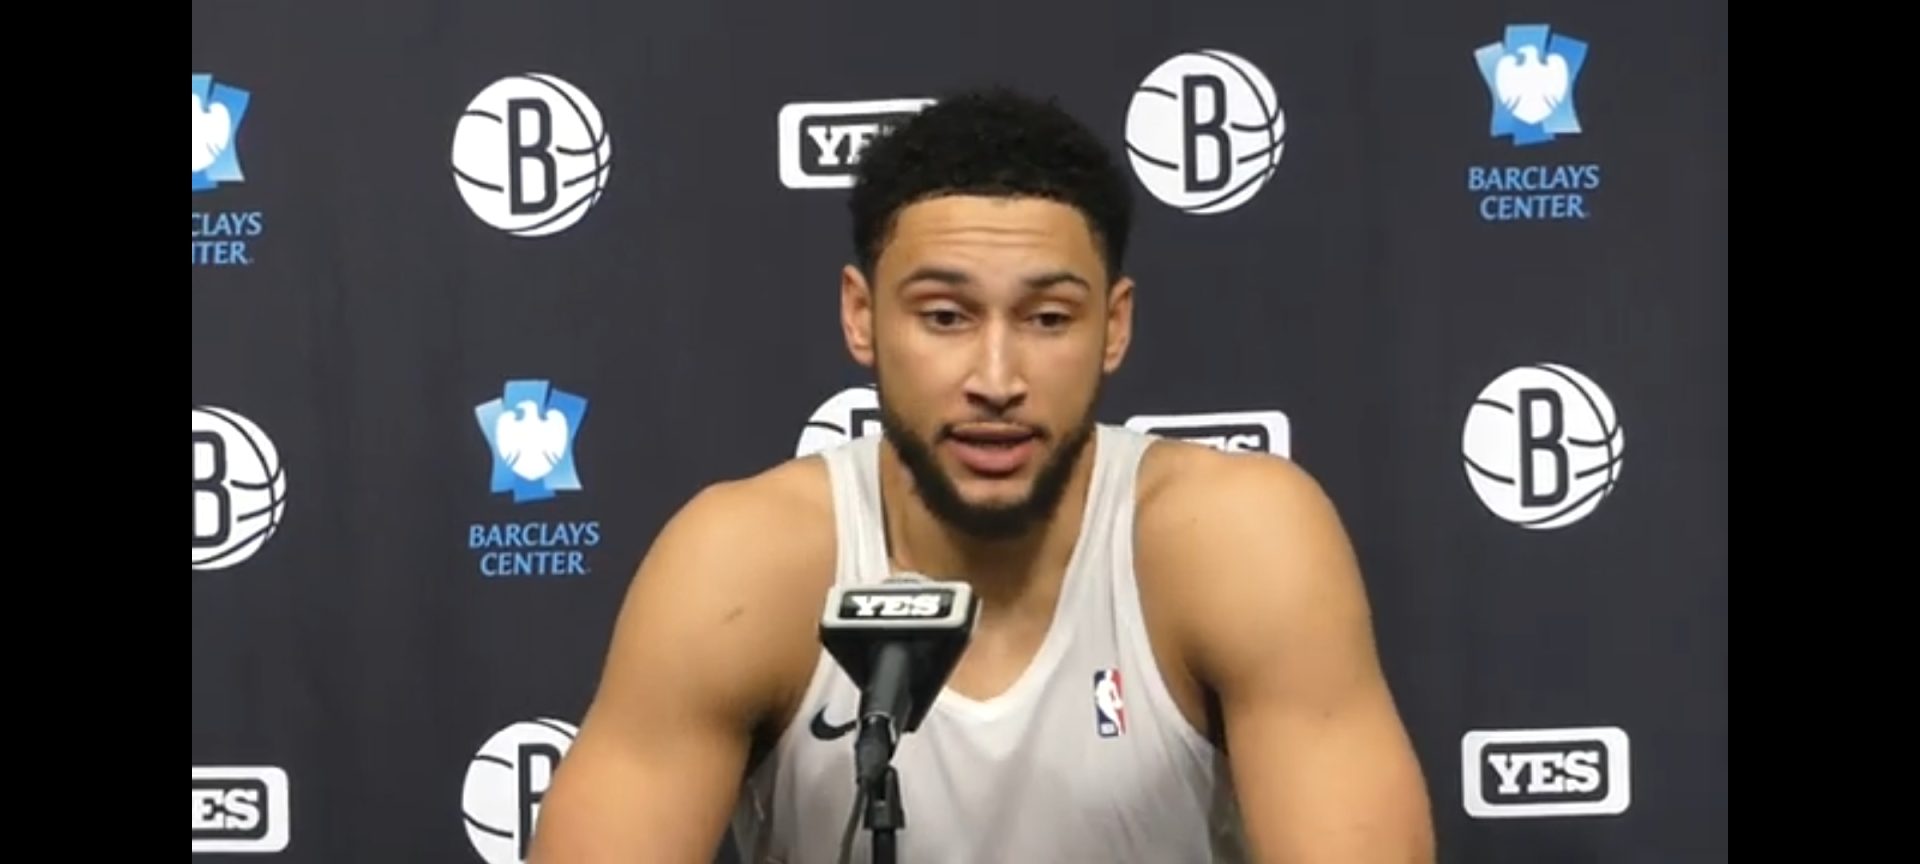 Ben Simmons of the Brooklyn Nets speaks to the media. (Photo by Derrel Jazz Johnson for rolling out)